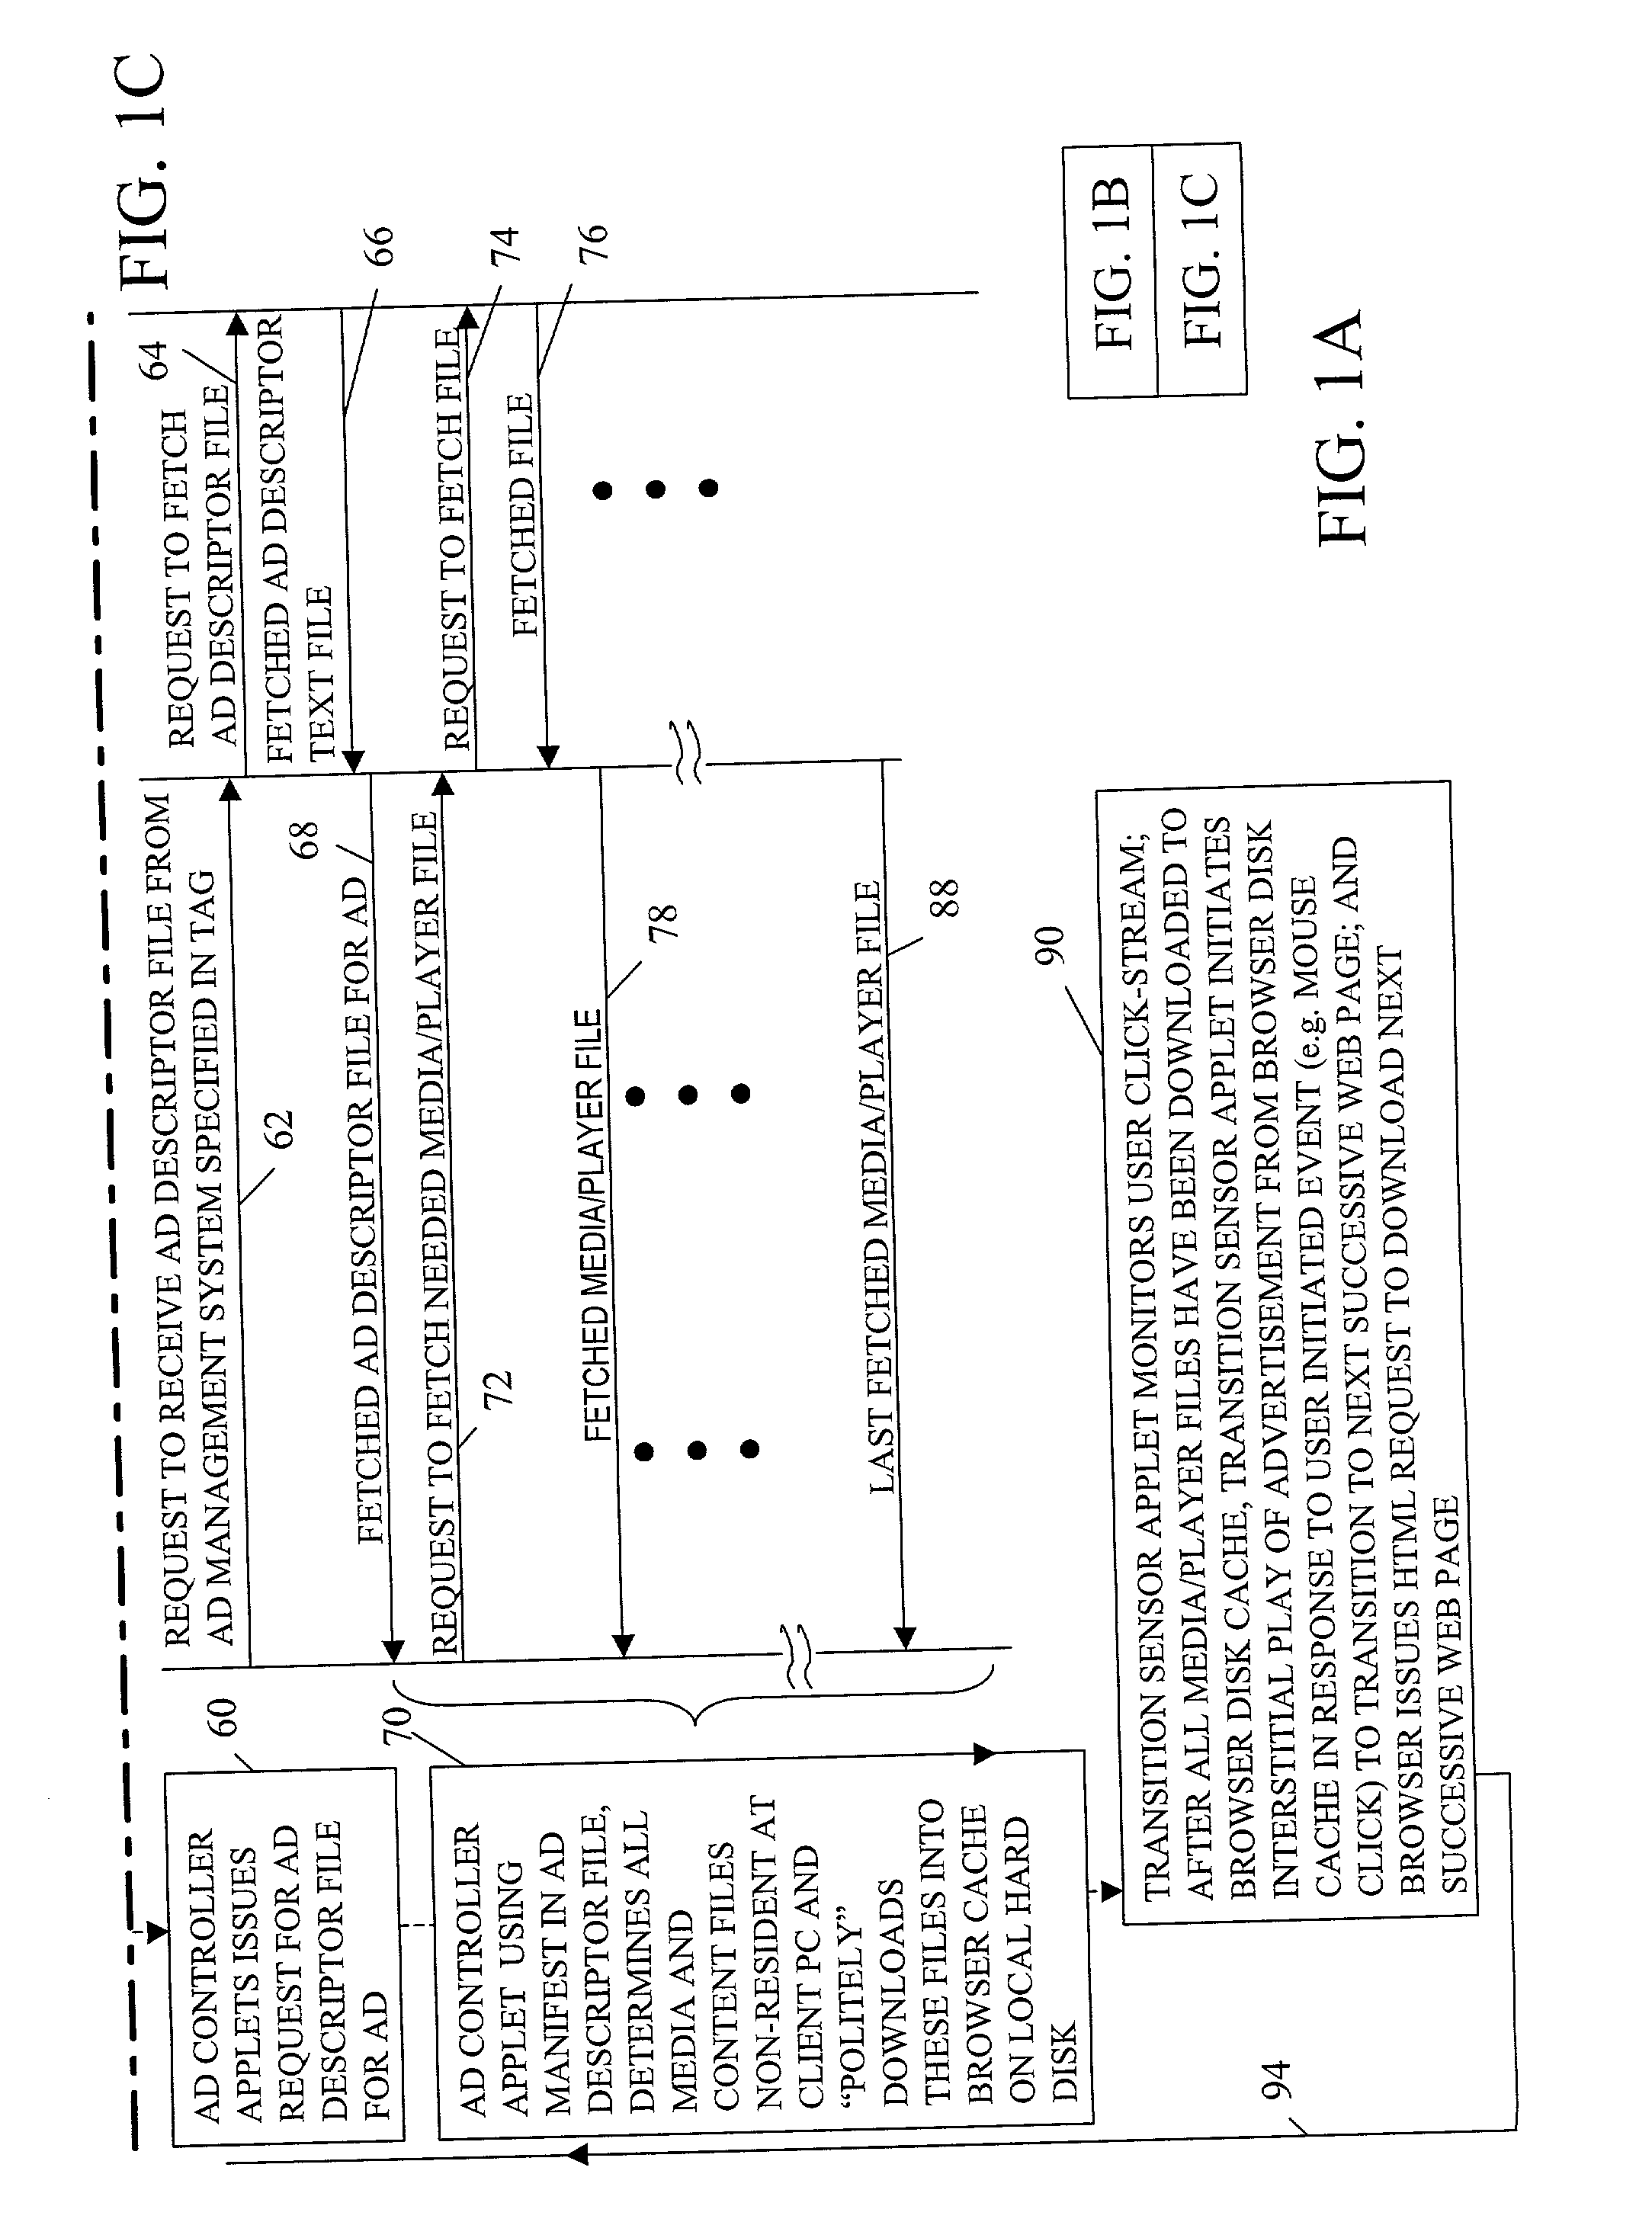 Apparatus and accompanying methods for network distribution and interstitial rendering of information objects to client computers